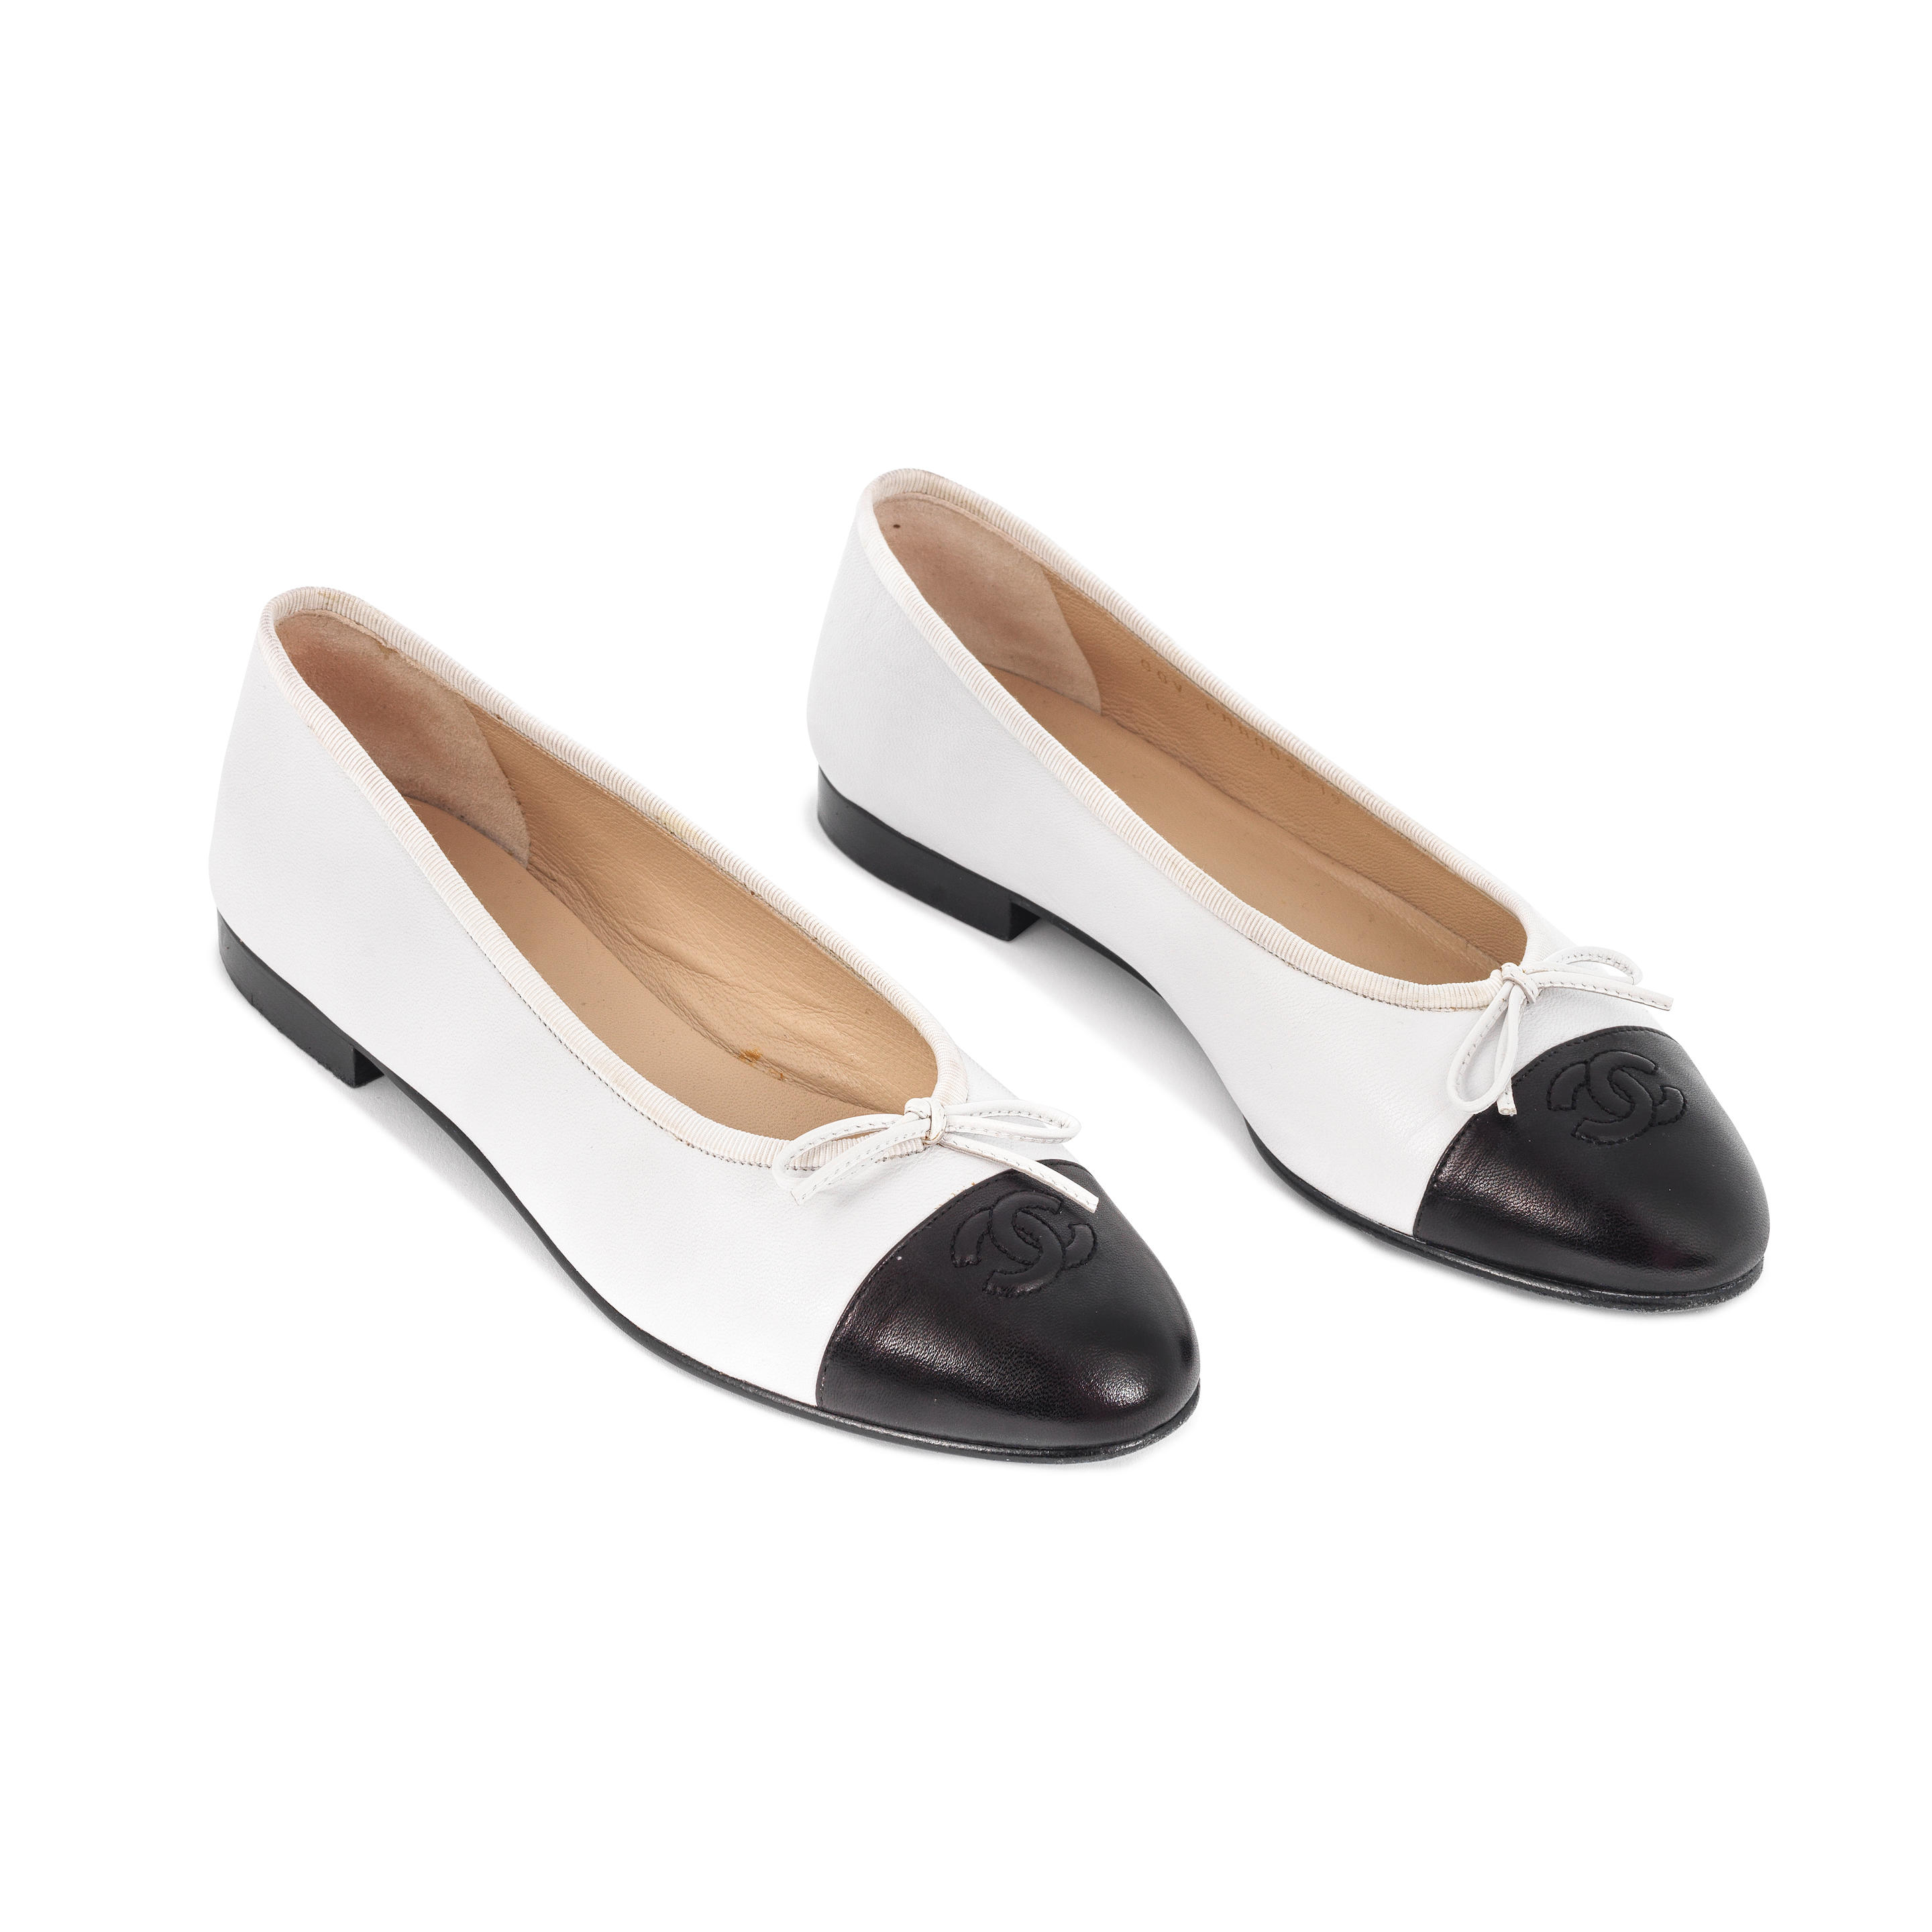 Chanel Shoes Ballerina Ballet Flats White / Black 39 / 9 New – Mightychic